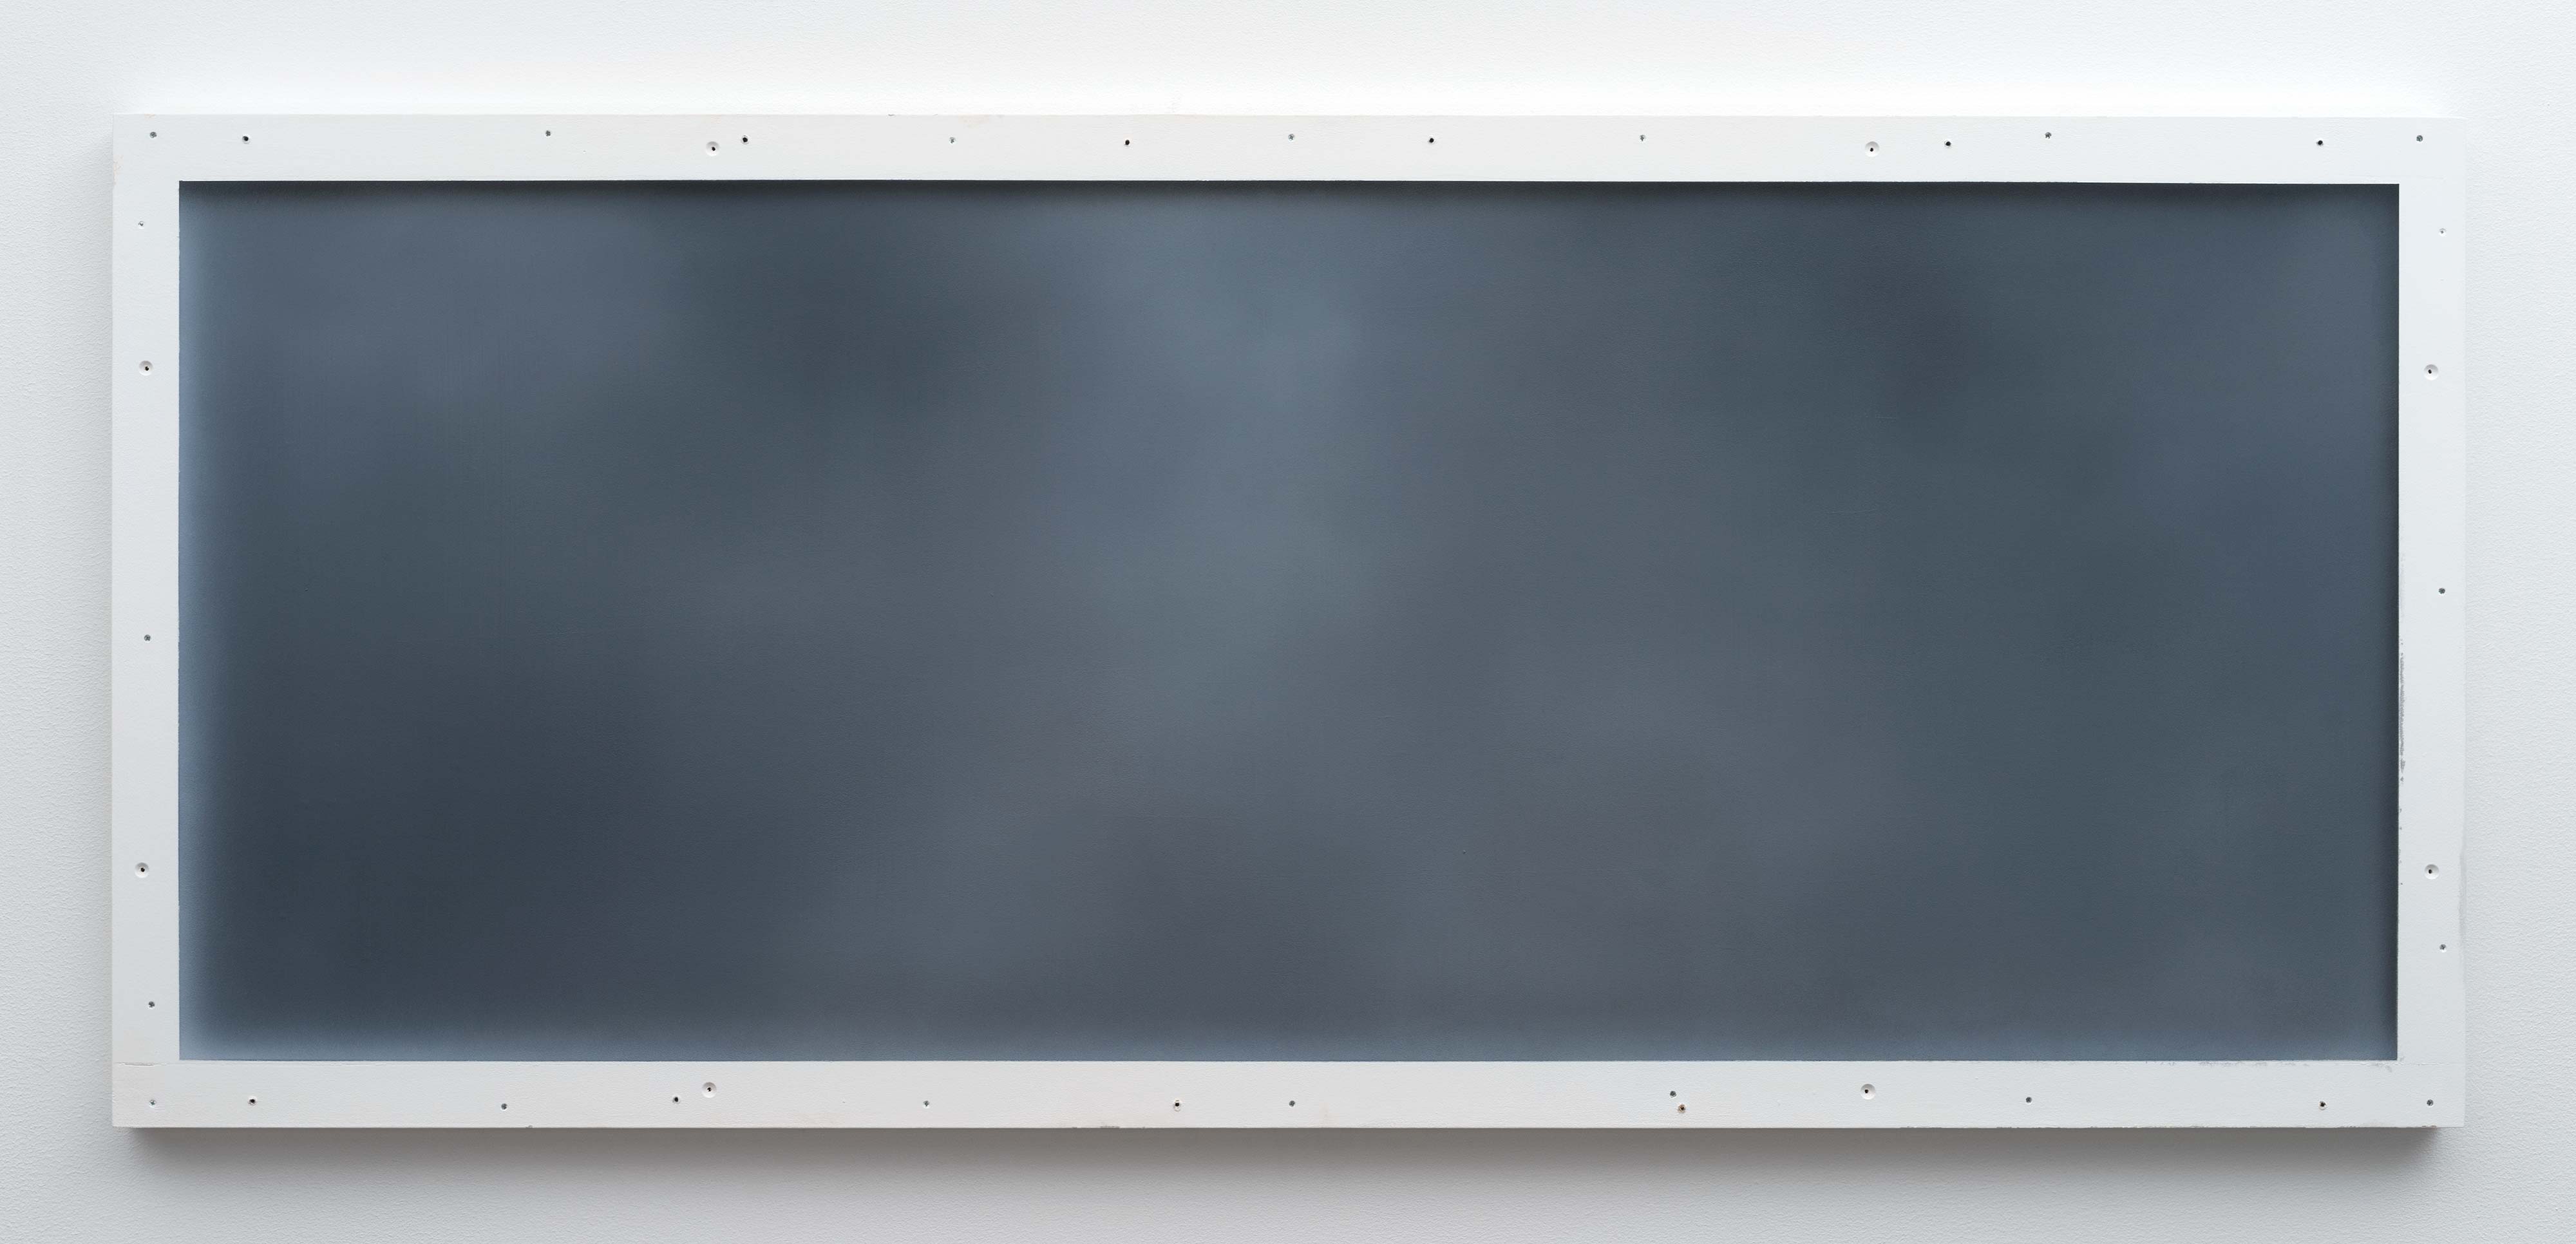 Christopher Page<br>Nocturne (I)<br>2016<br>oil and acrylic on panel<br>23.6 x 54.3 in (60 x 138 cm)